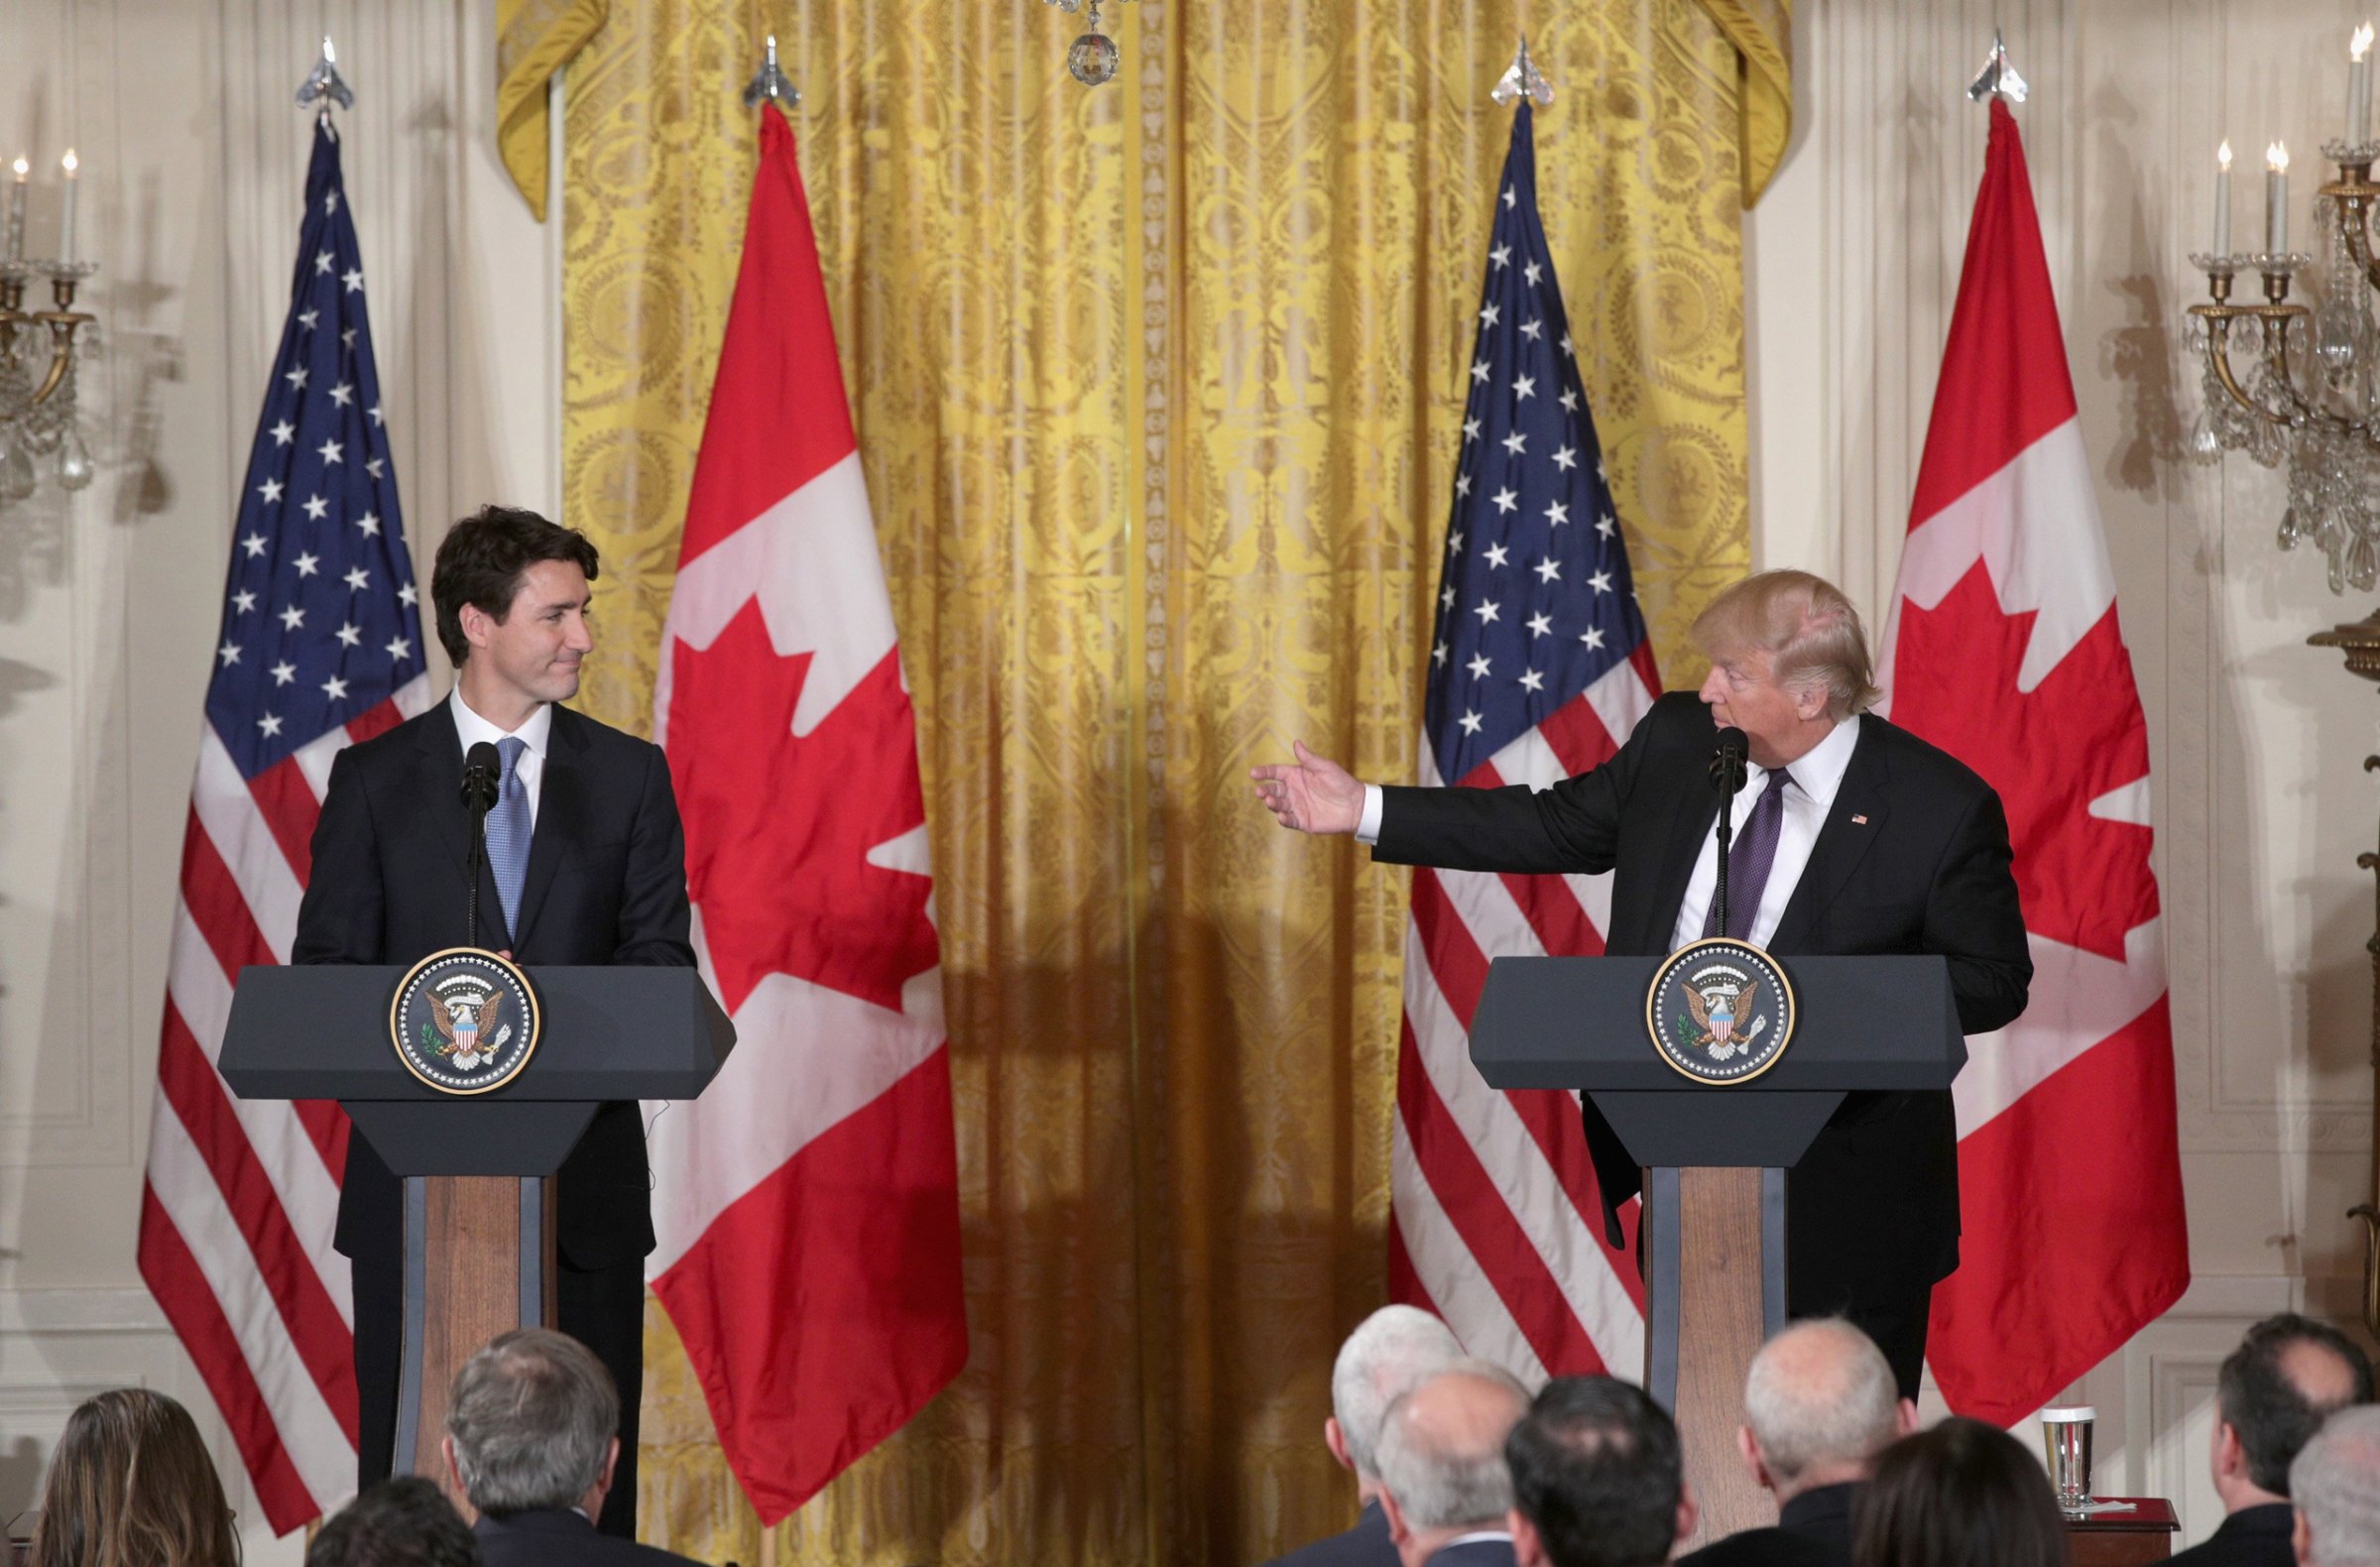 WASHINGTON, DC - FEBRUARY 13: U.S. President Donald Trump (R) and Canadian Prime Minister Justin Trudeau participate in a joint news conference in the East Room of the White House on February 13, 2017 in Washington, DC. The two leaders participated in a roundtable discussion on the advancement of women entrepreneurs and business leaders. (Photo by Alex Wong/Getty Images)